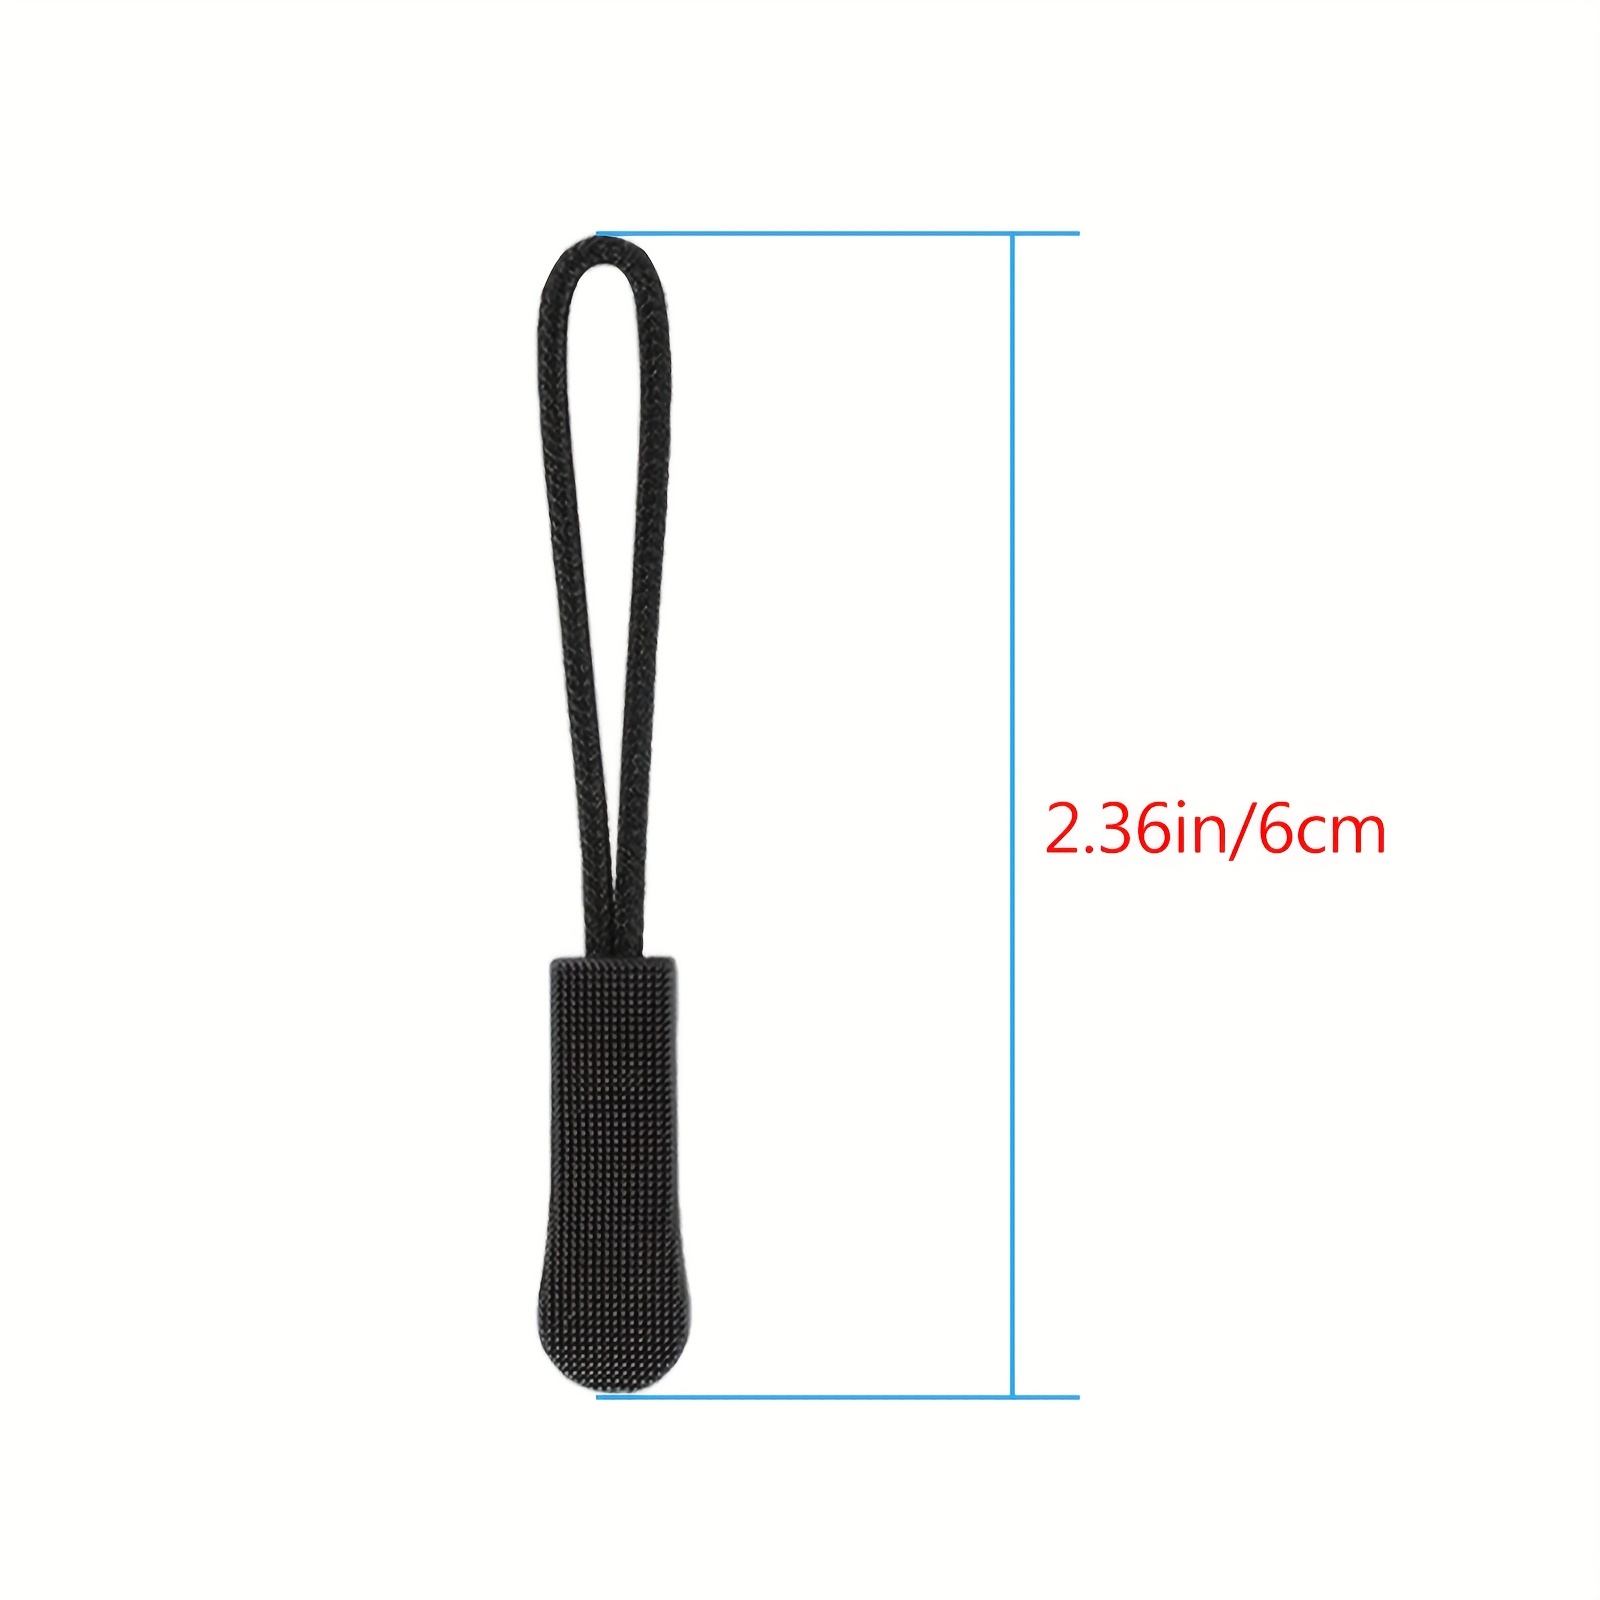 Nylon Zipper Pulls U Shape Heavy Duty Zipper Tags Black Cord Zipper Pull  Replacements Light Zipper Extension Replacement Straps for Backpack Luggage